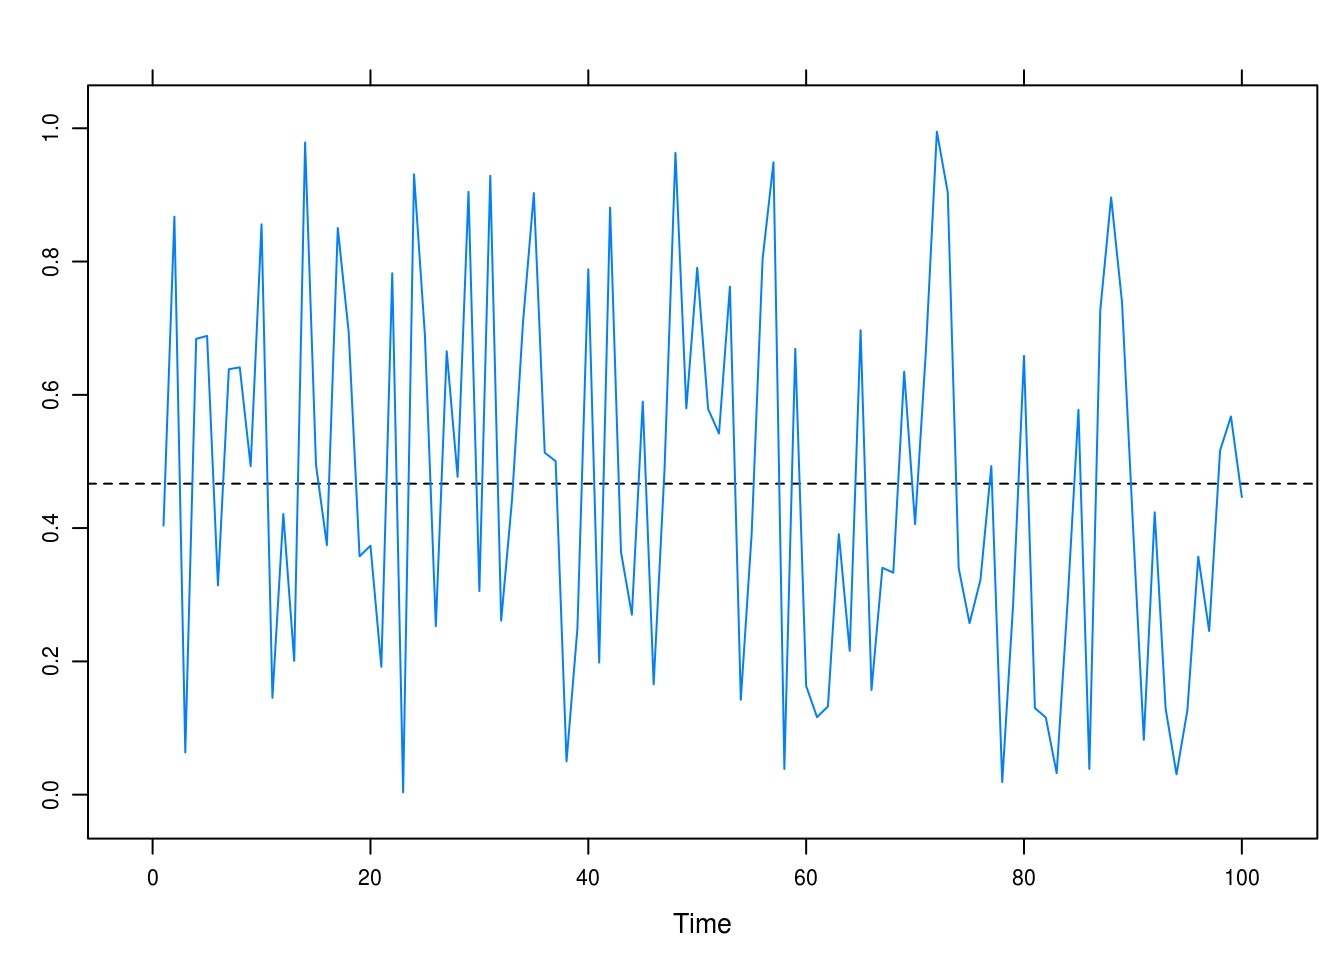 A white noise time series: no drift, independence between observations.